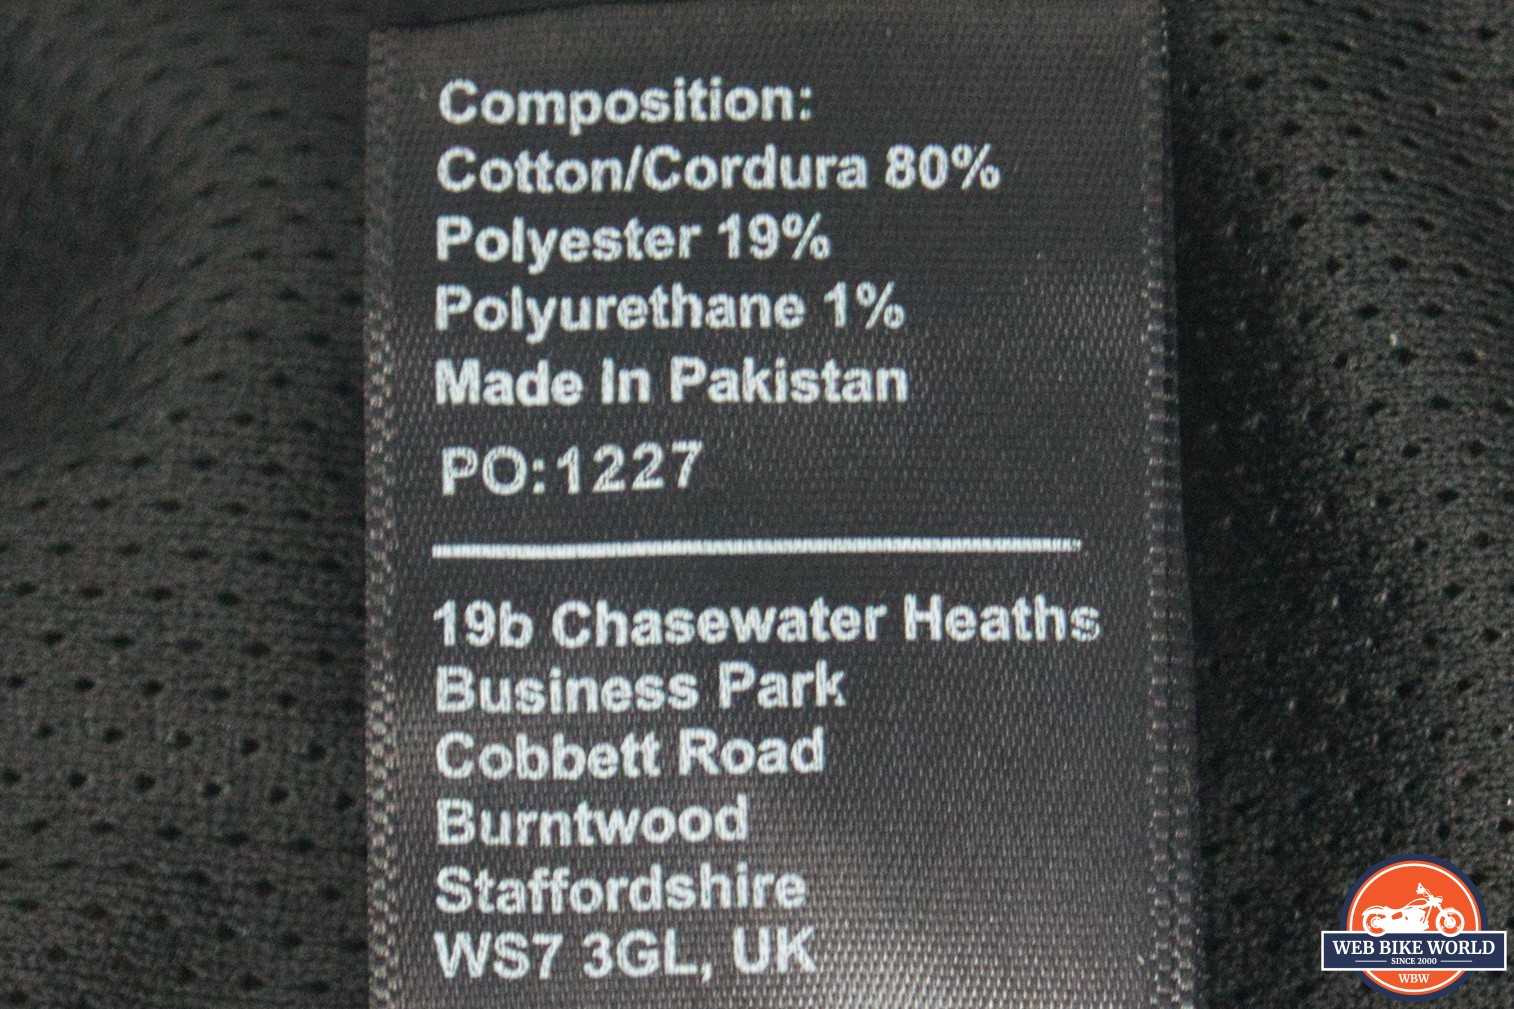 Material composition of the jacket